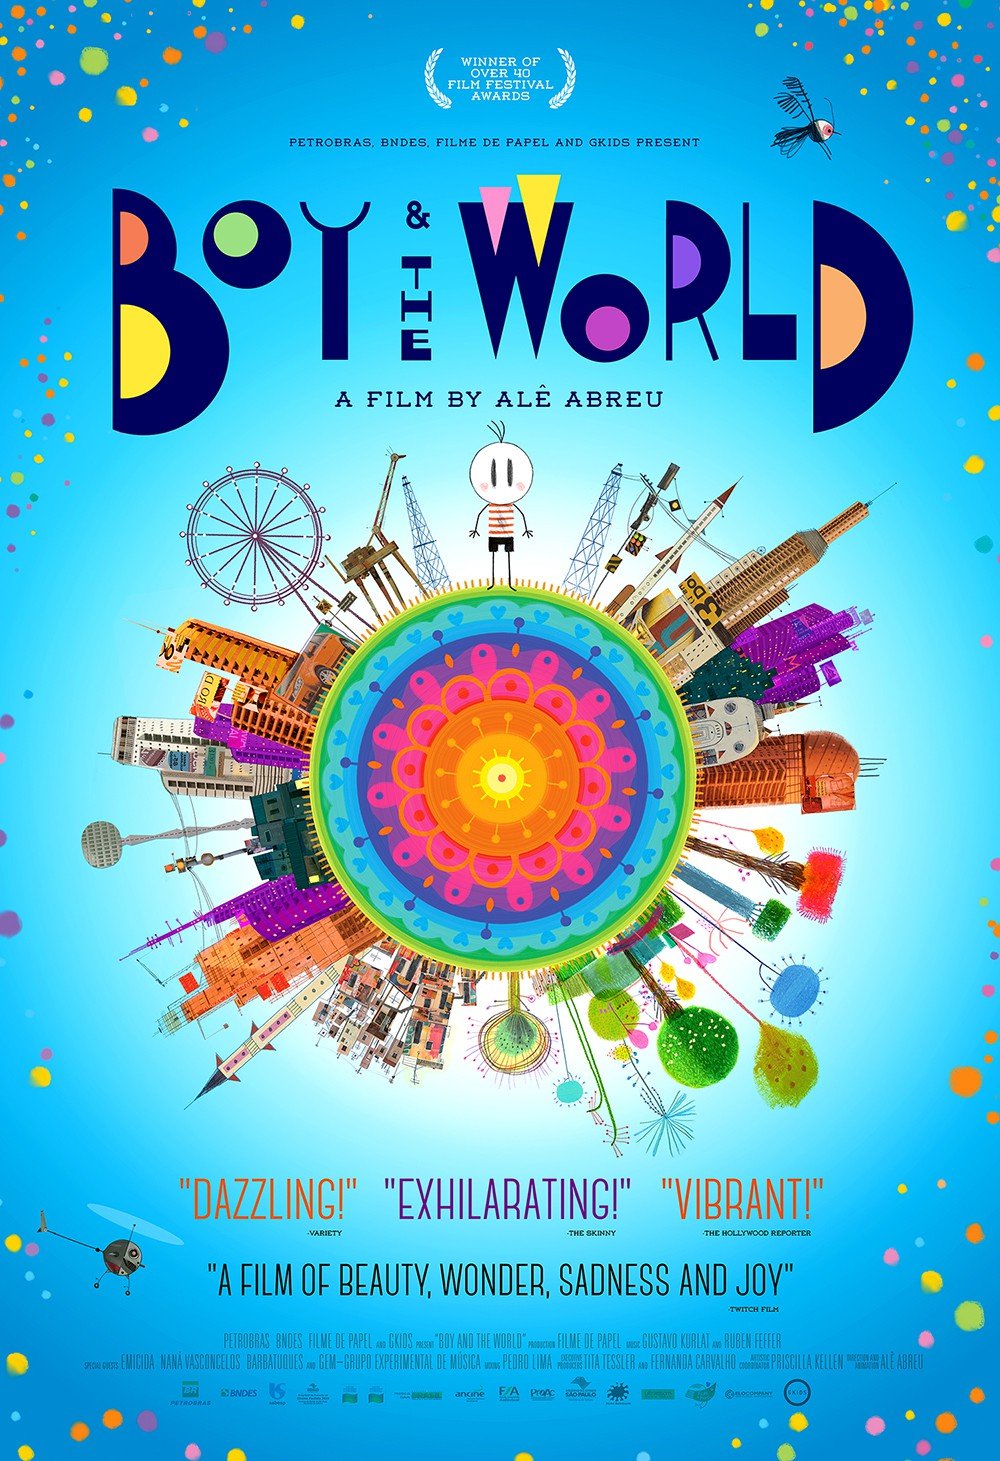 L'affiche du film The Boy and the World